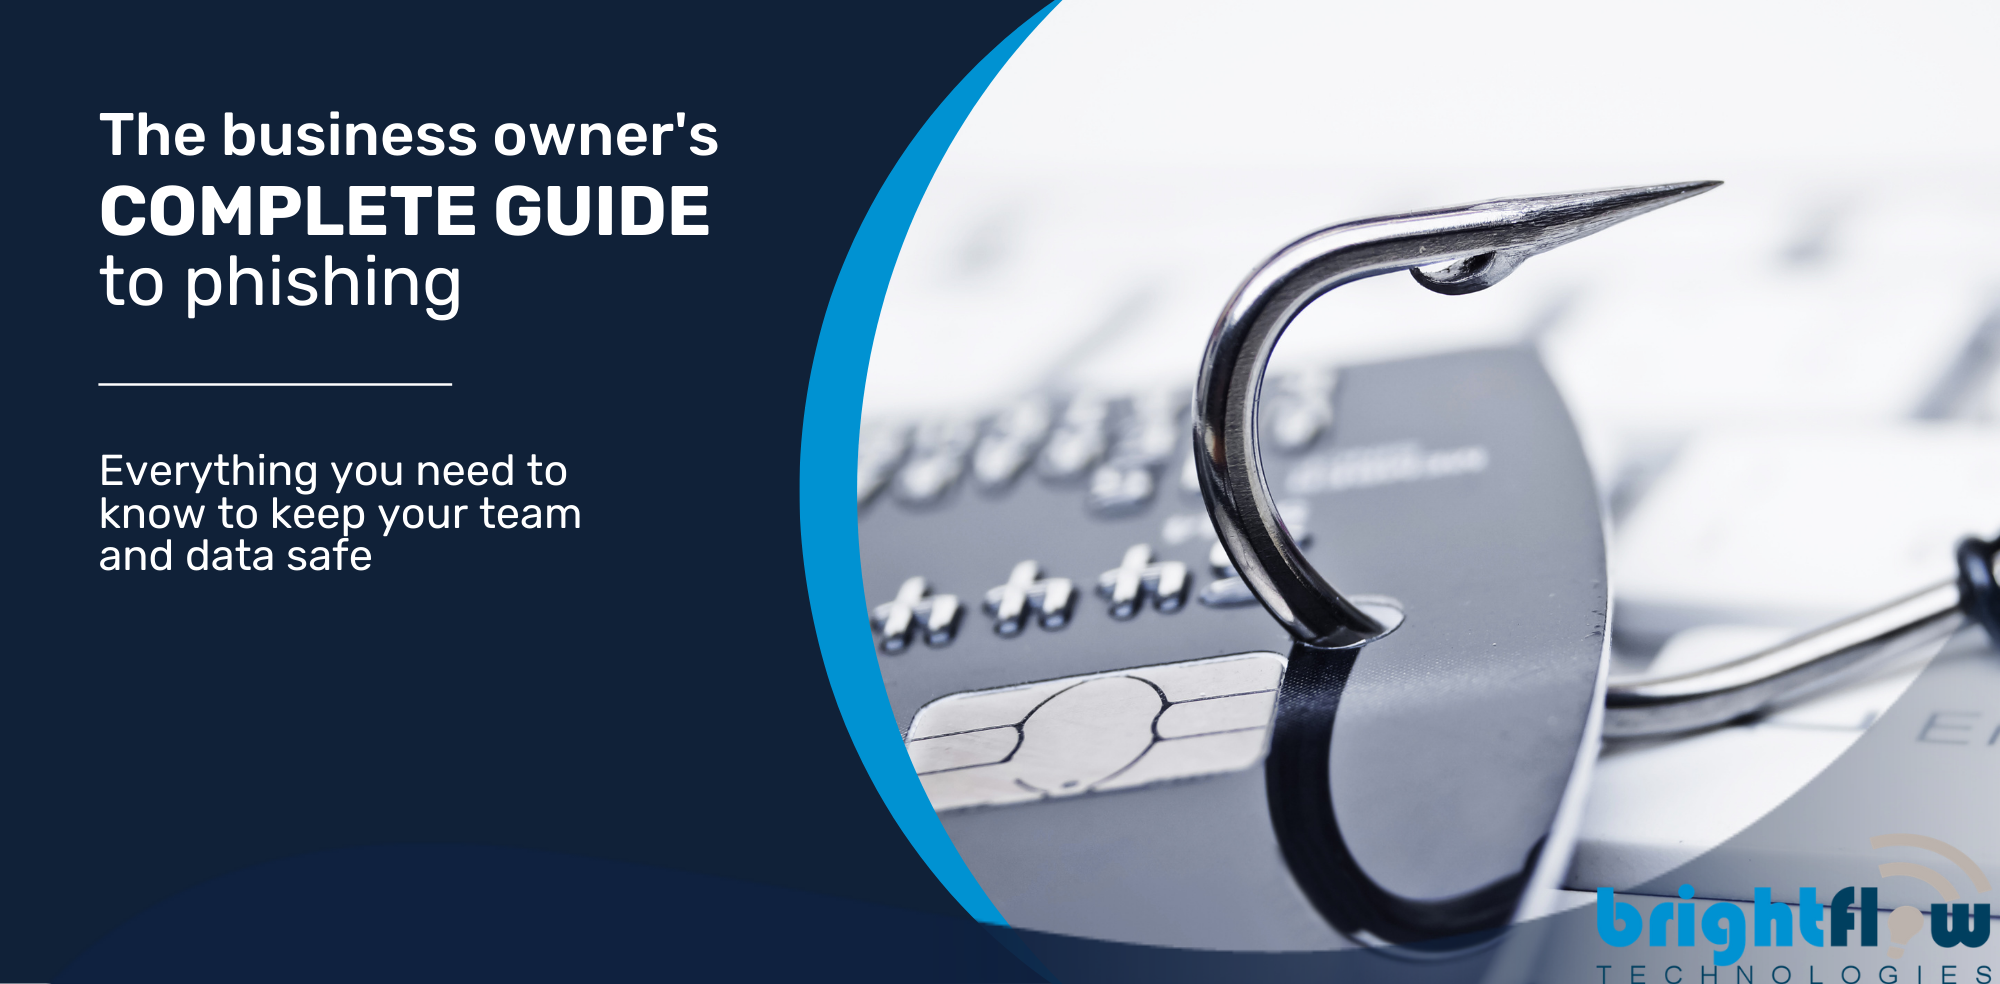 The business owner’s complete guide to phishing